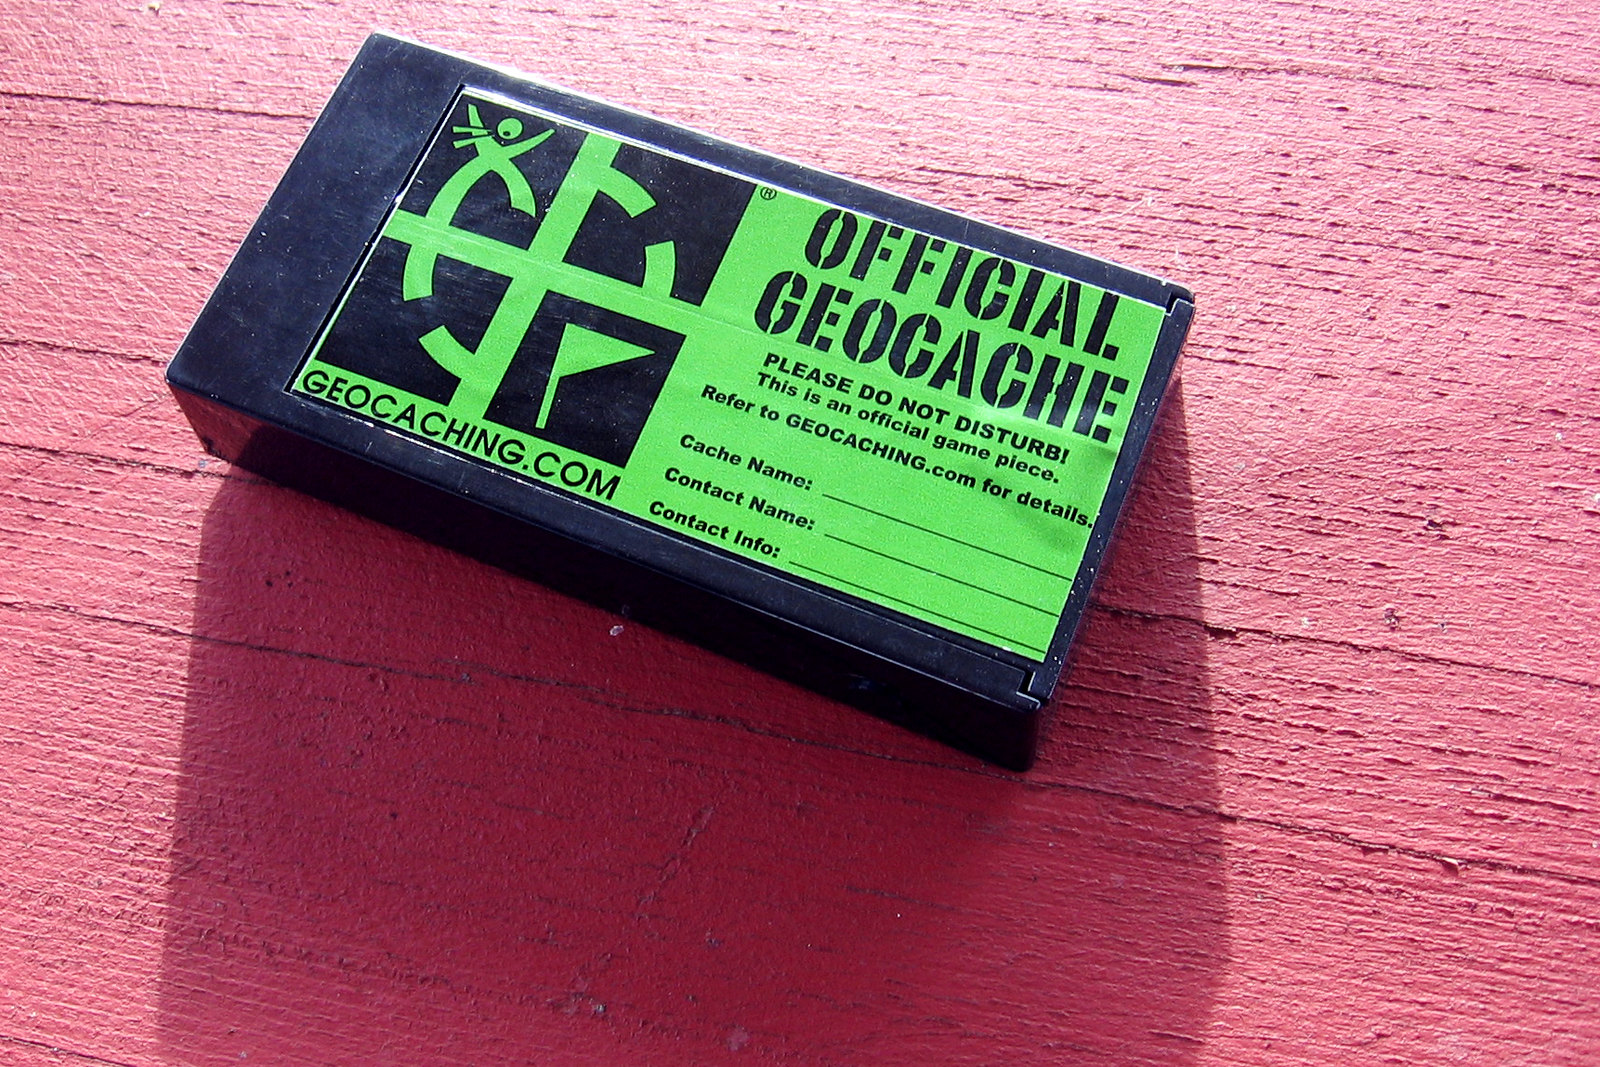 A box labled "official geocache"